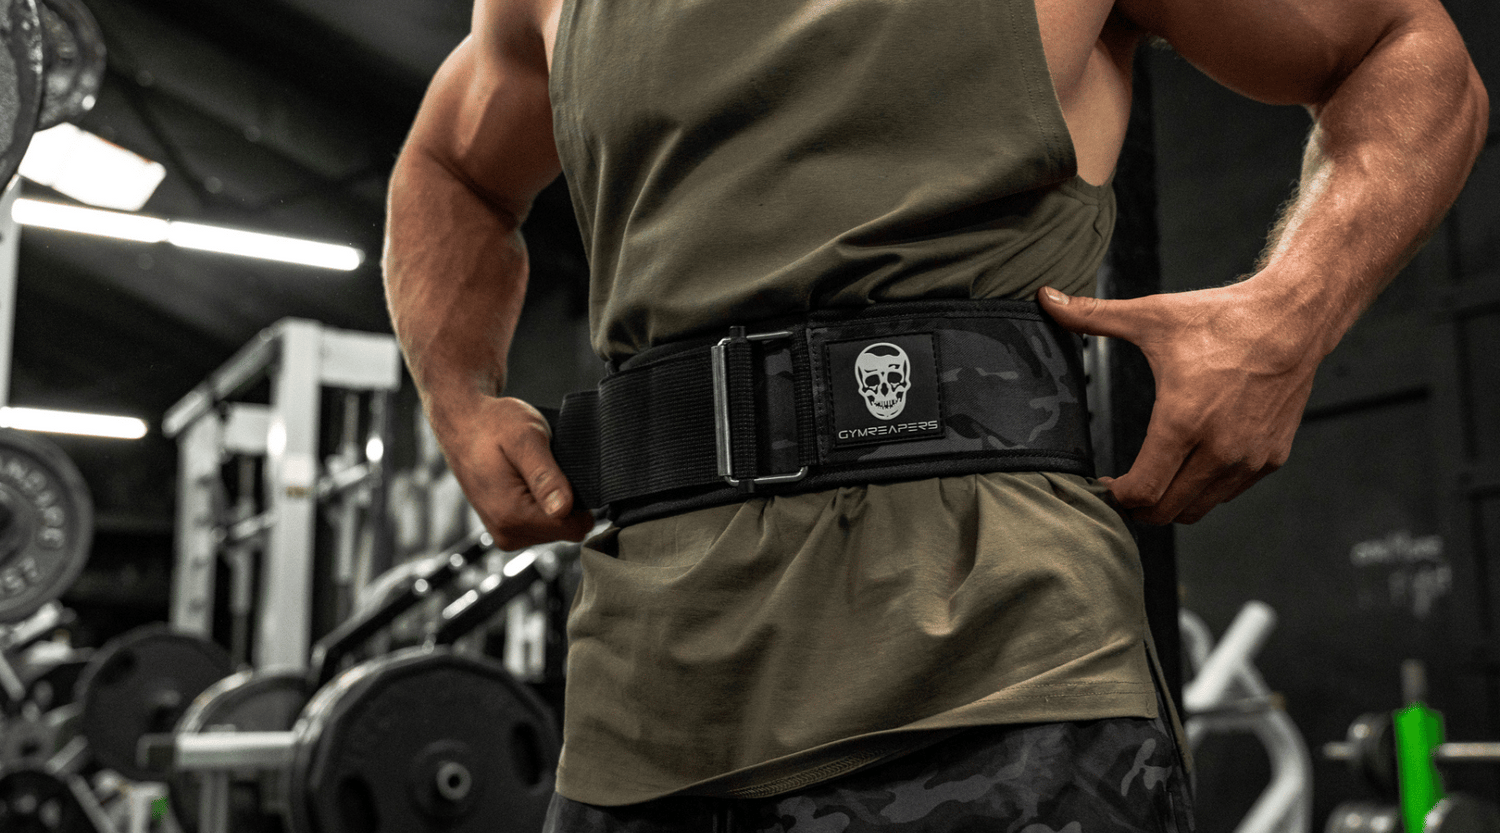 Single Prong Power Lifting Belt Men & Women Weightlifting Competition  Workout Training Weight Lifting Belts 10mm IPF Powerlifting Belt